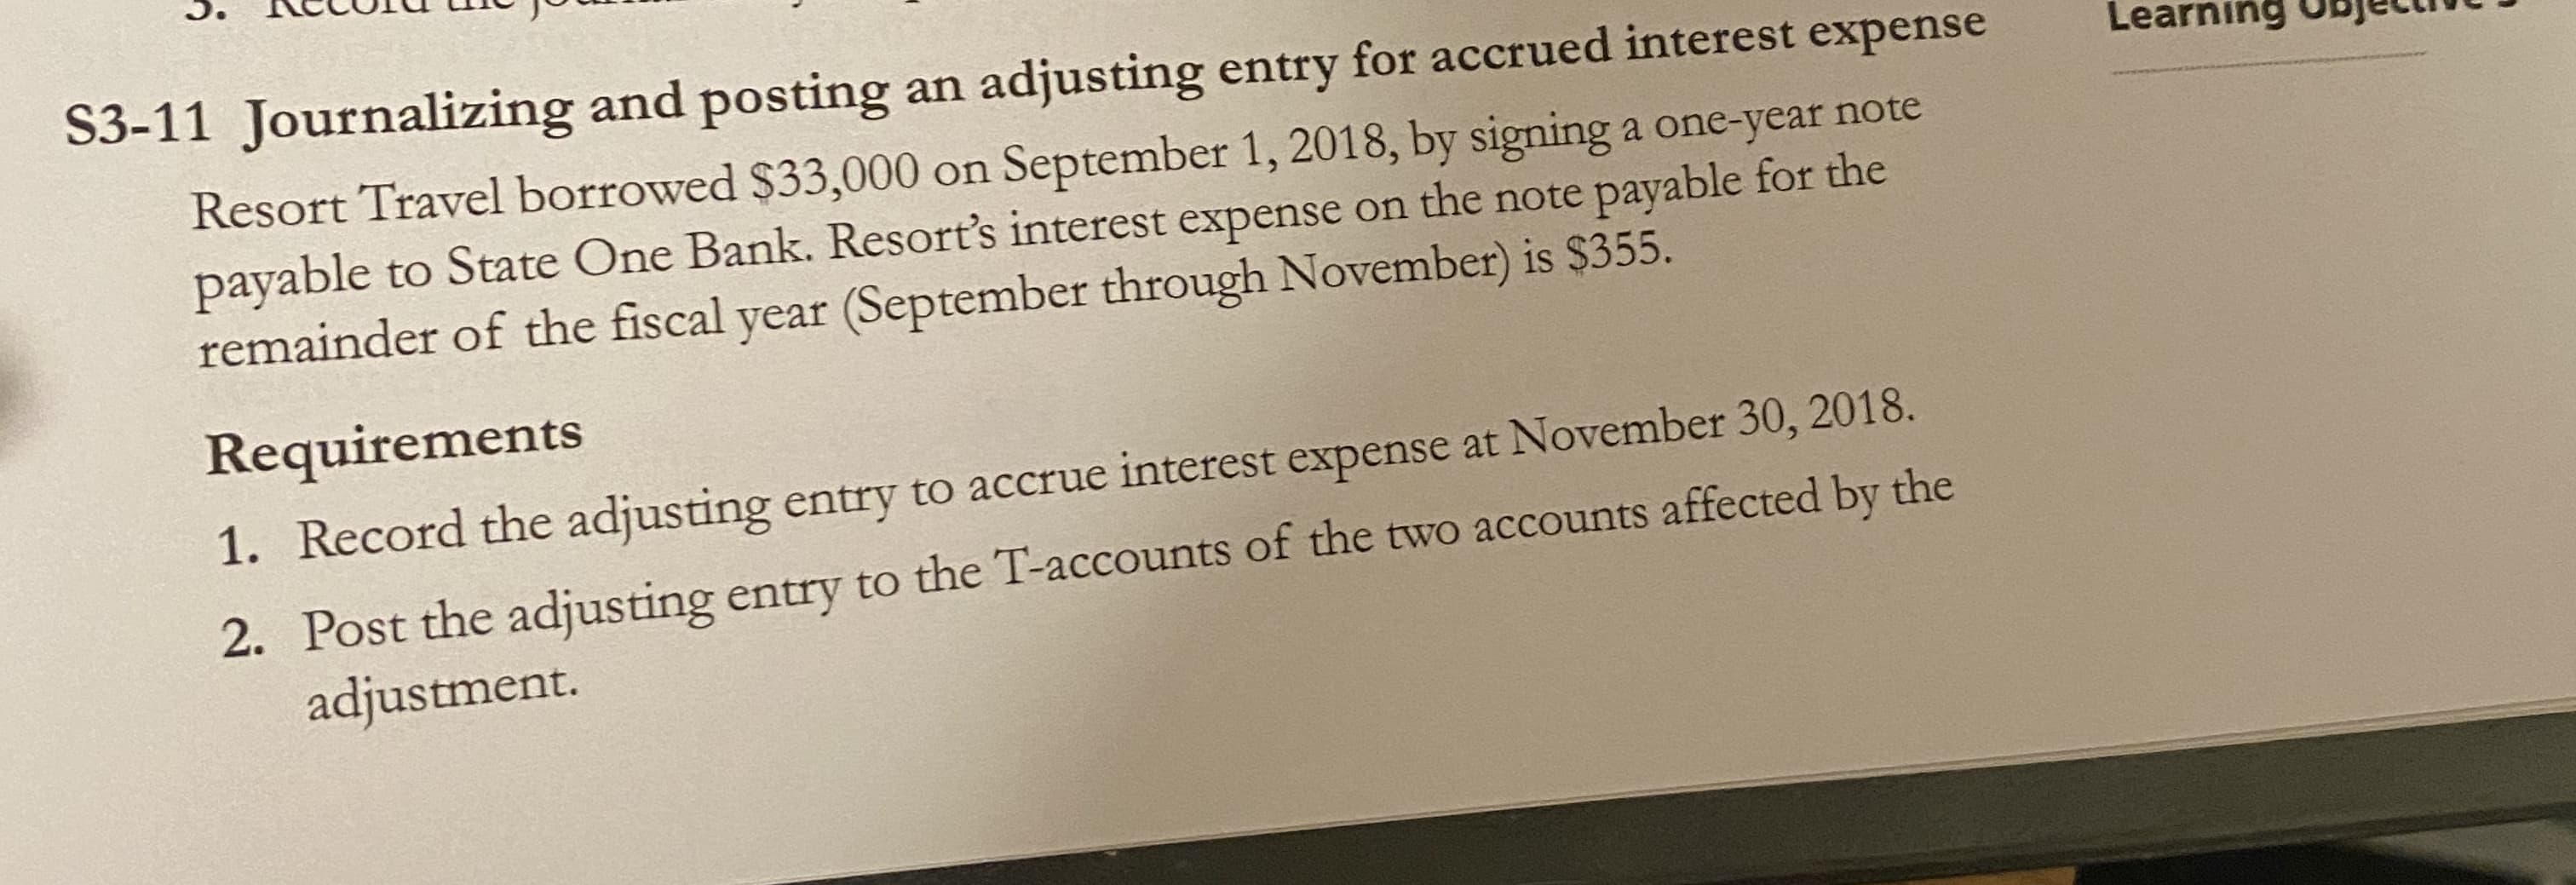 S3-11 Journalizing and posting an adjusting entry for accrued interest expense
Resort Travel borrowed $33,000 on September 1, 2018, by signing a one-year note
payable to State One Bank. Resort's interest expense on the note payable for the
remainder of the fiscal year (September through November) is $355.
Learning ODjetim
Requirements
Record the adjusting entry to accrue interest expense at November 30, 2018.
1.
Post the adjusting entry to the T-accounts of the two accounts affected by the
adjustment.
2.
